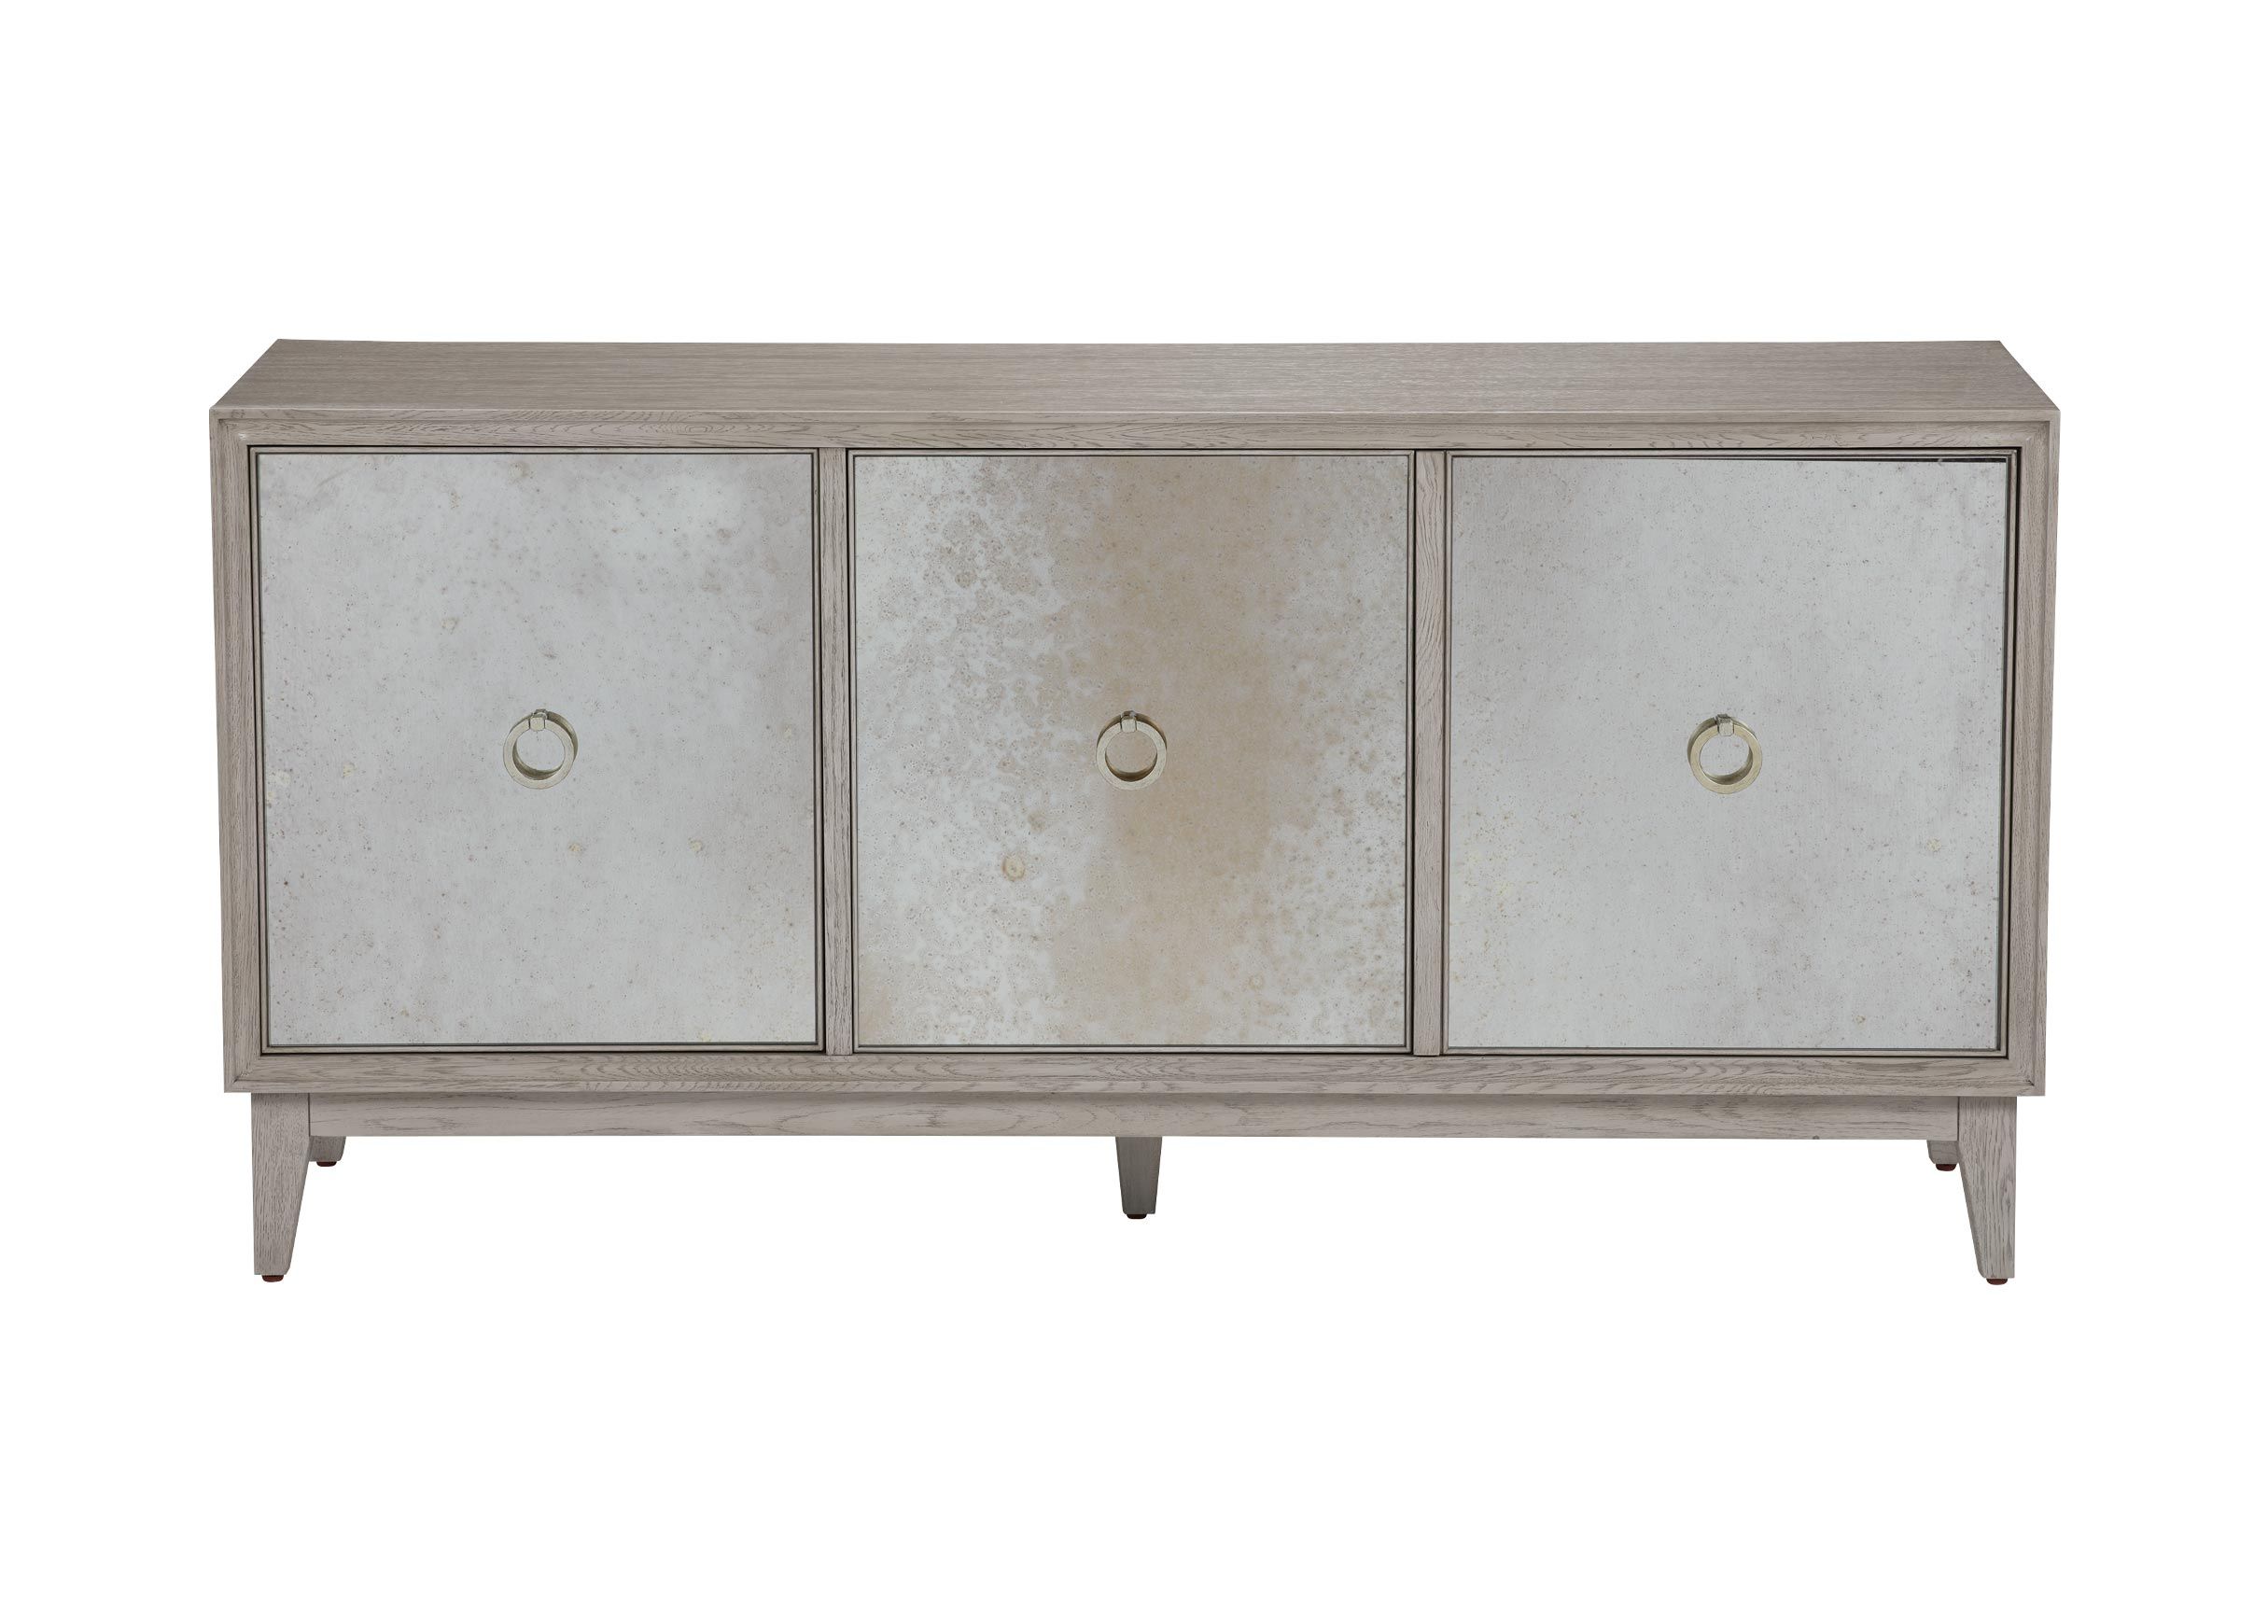 Heston Mirrored Buffet | Mirrored Sideboard | Ethan Allen Within Mirrored Buffets (View 11 of 30)